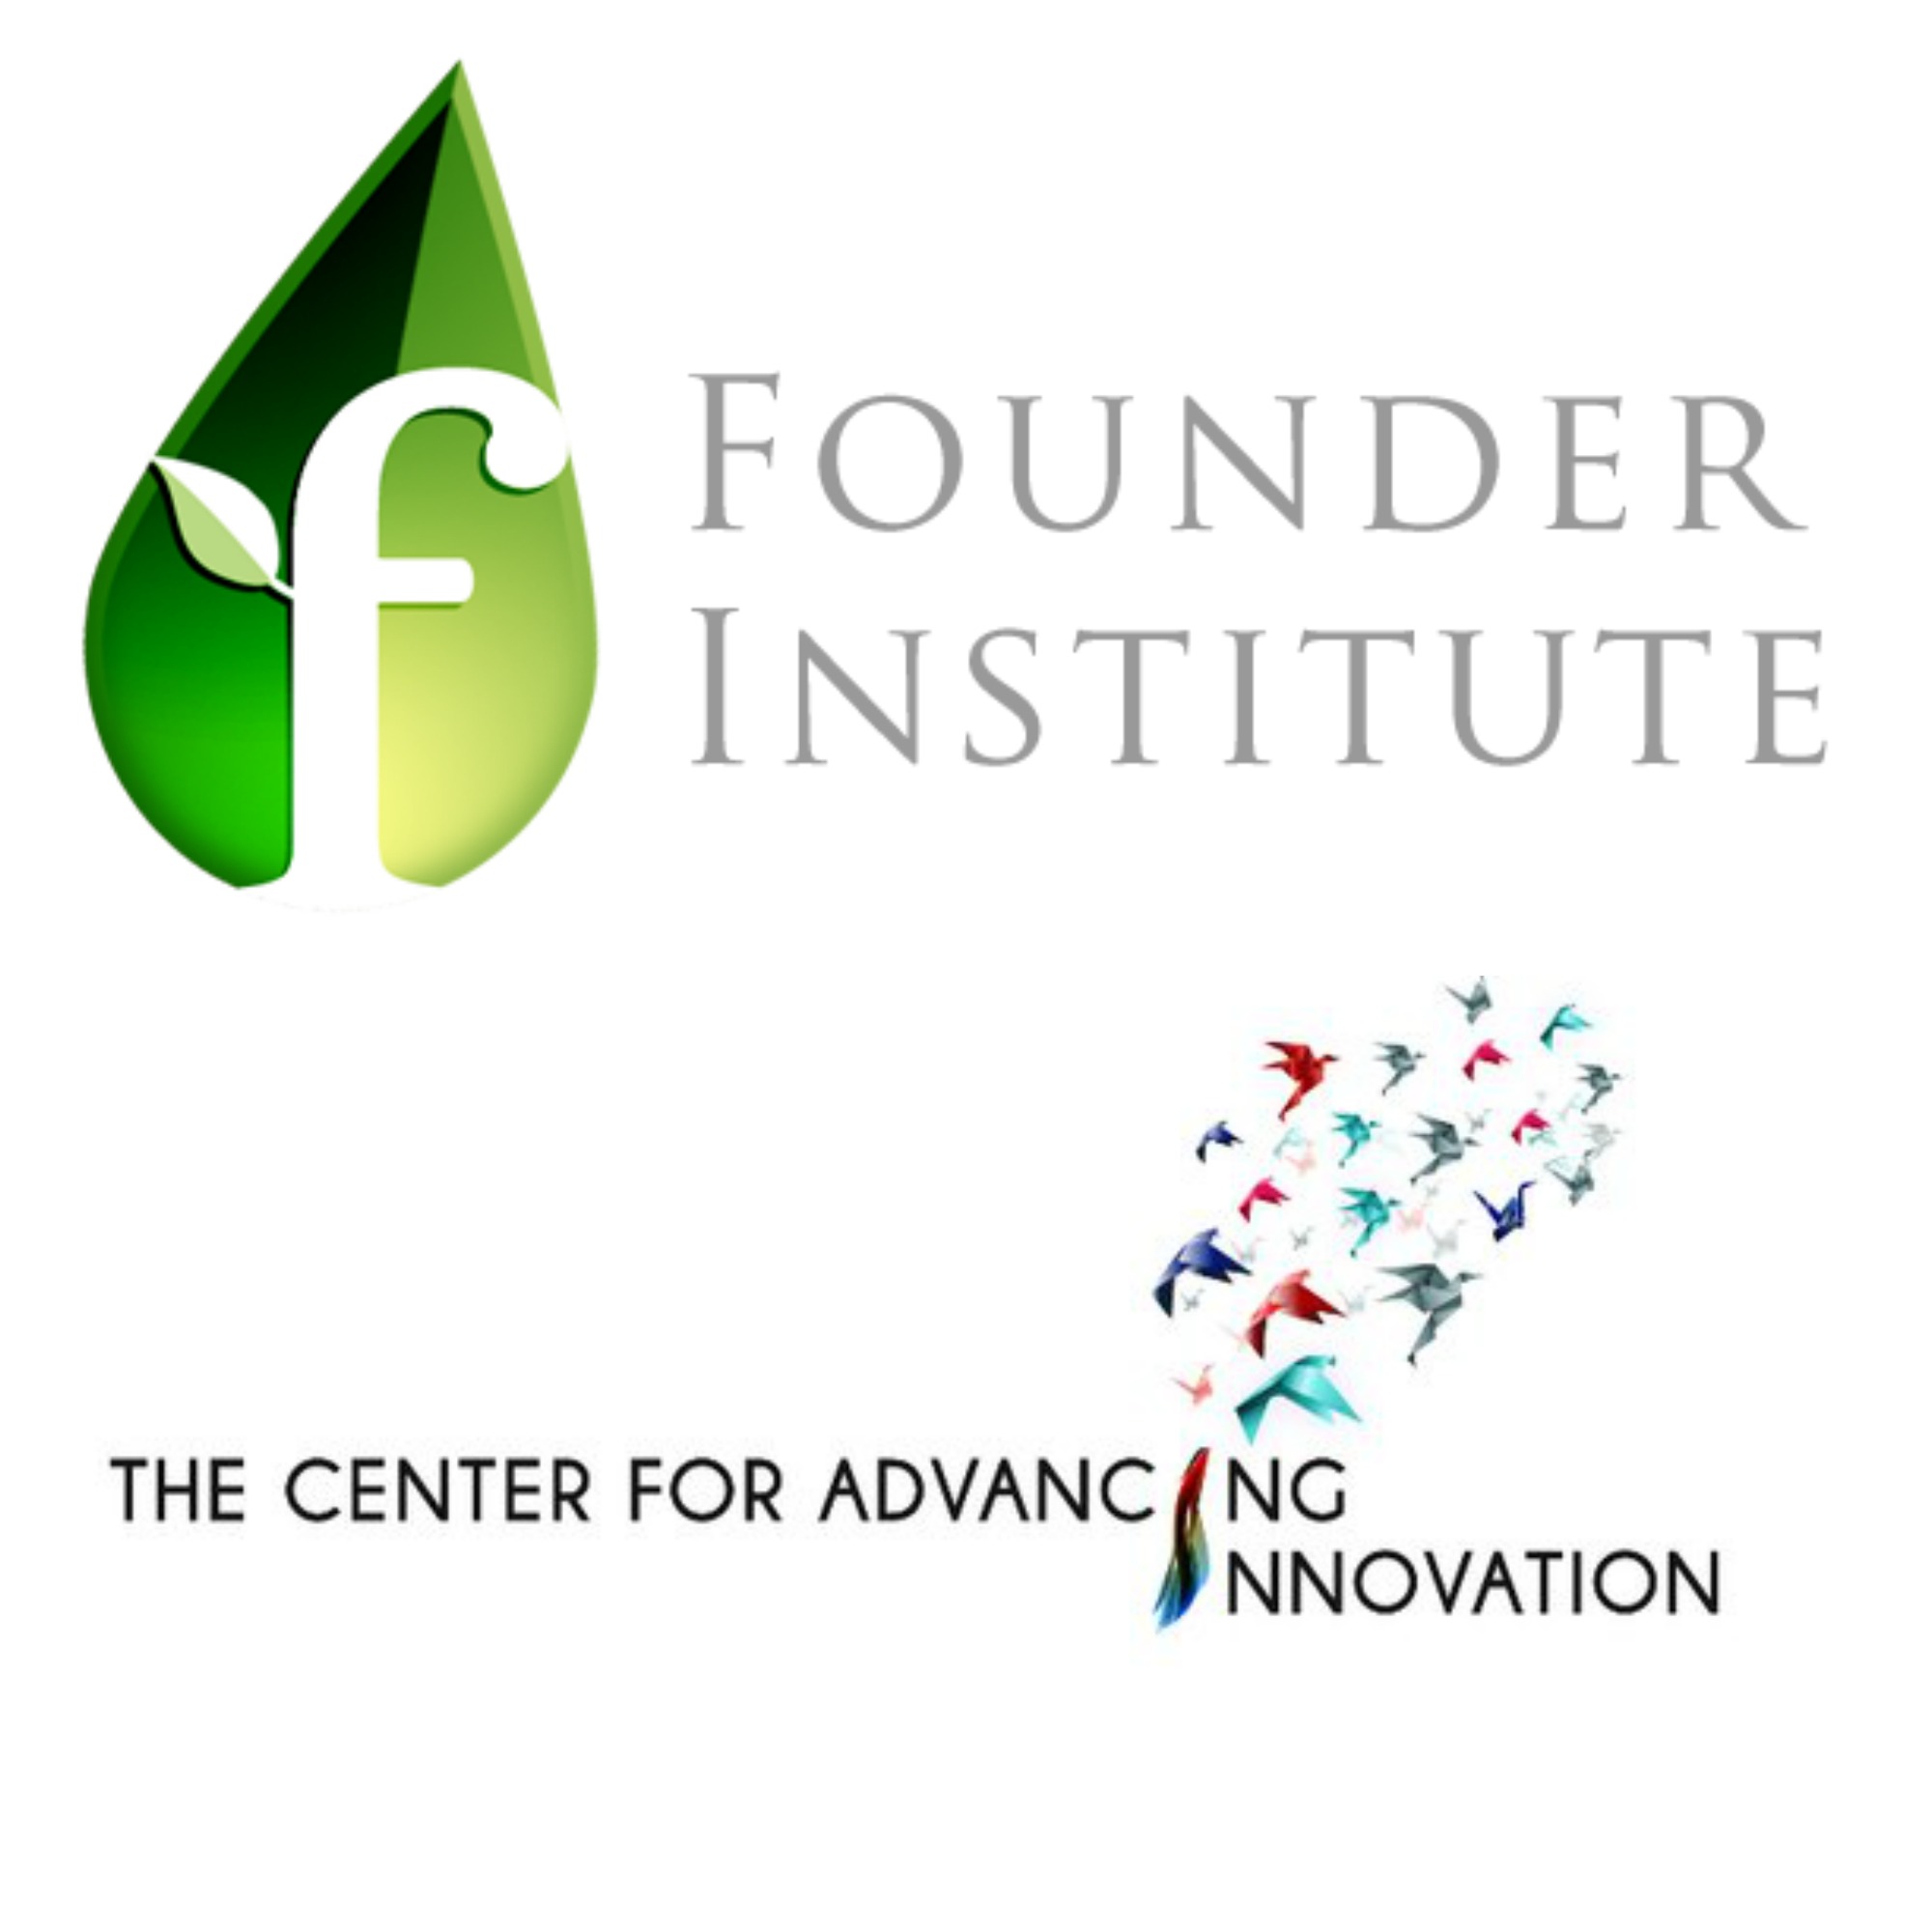 Center for Advancing Innovation partners with Founder Institute